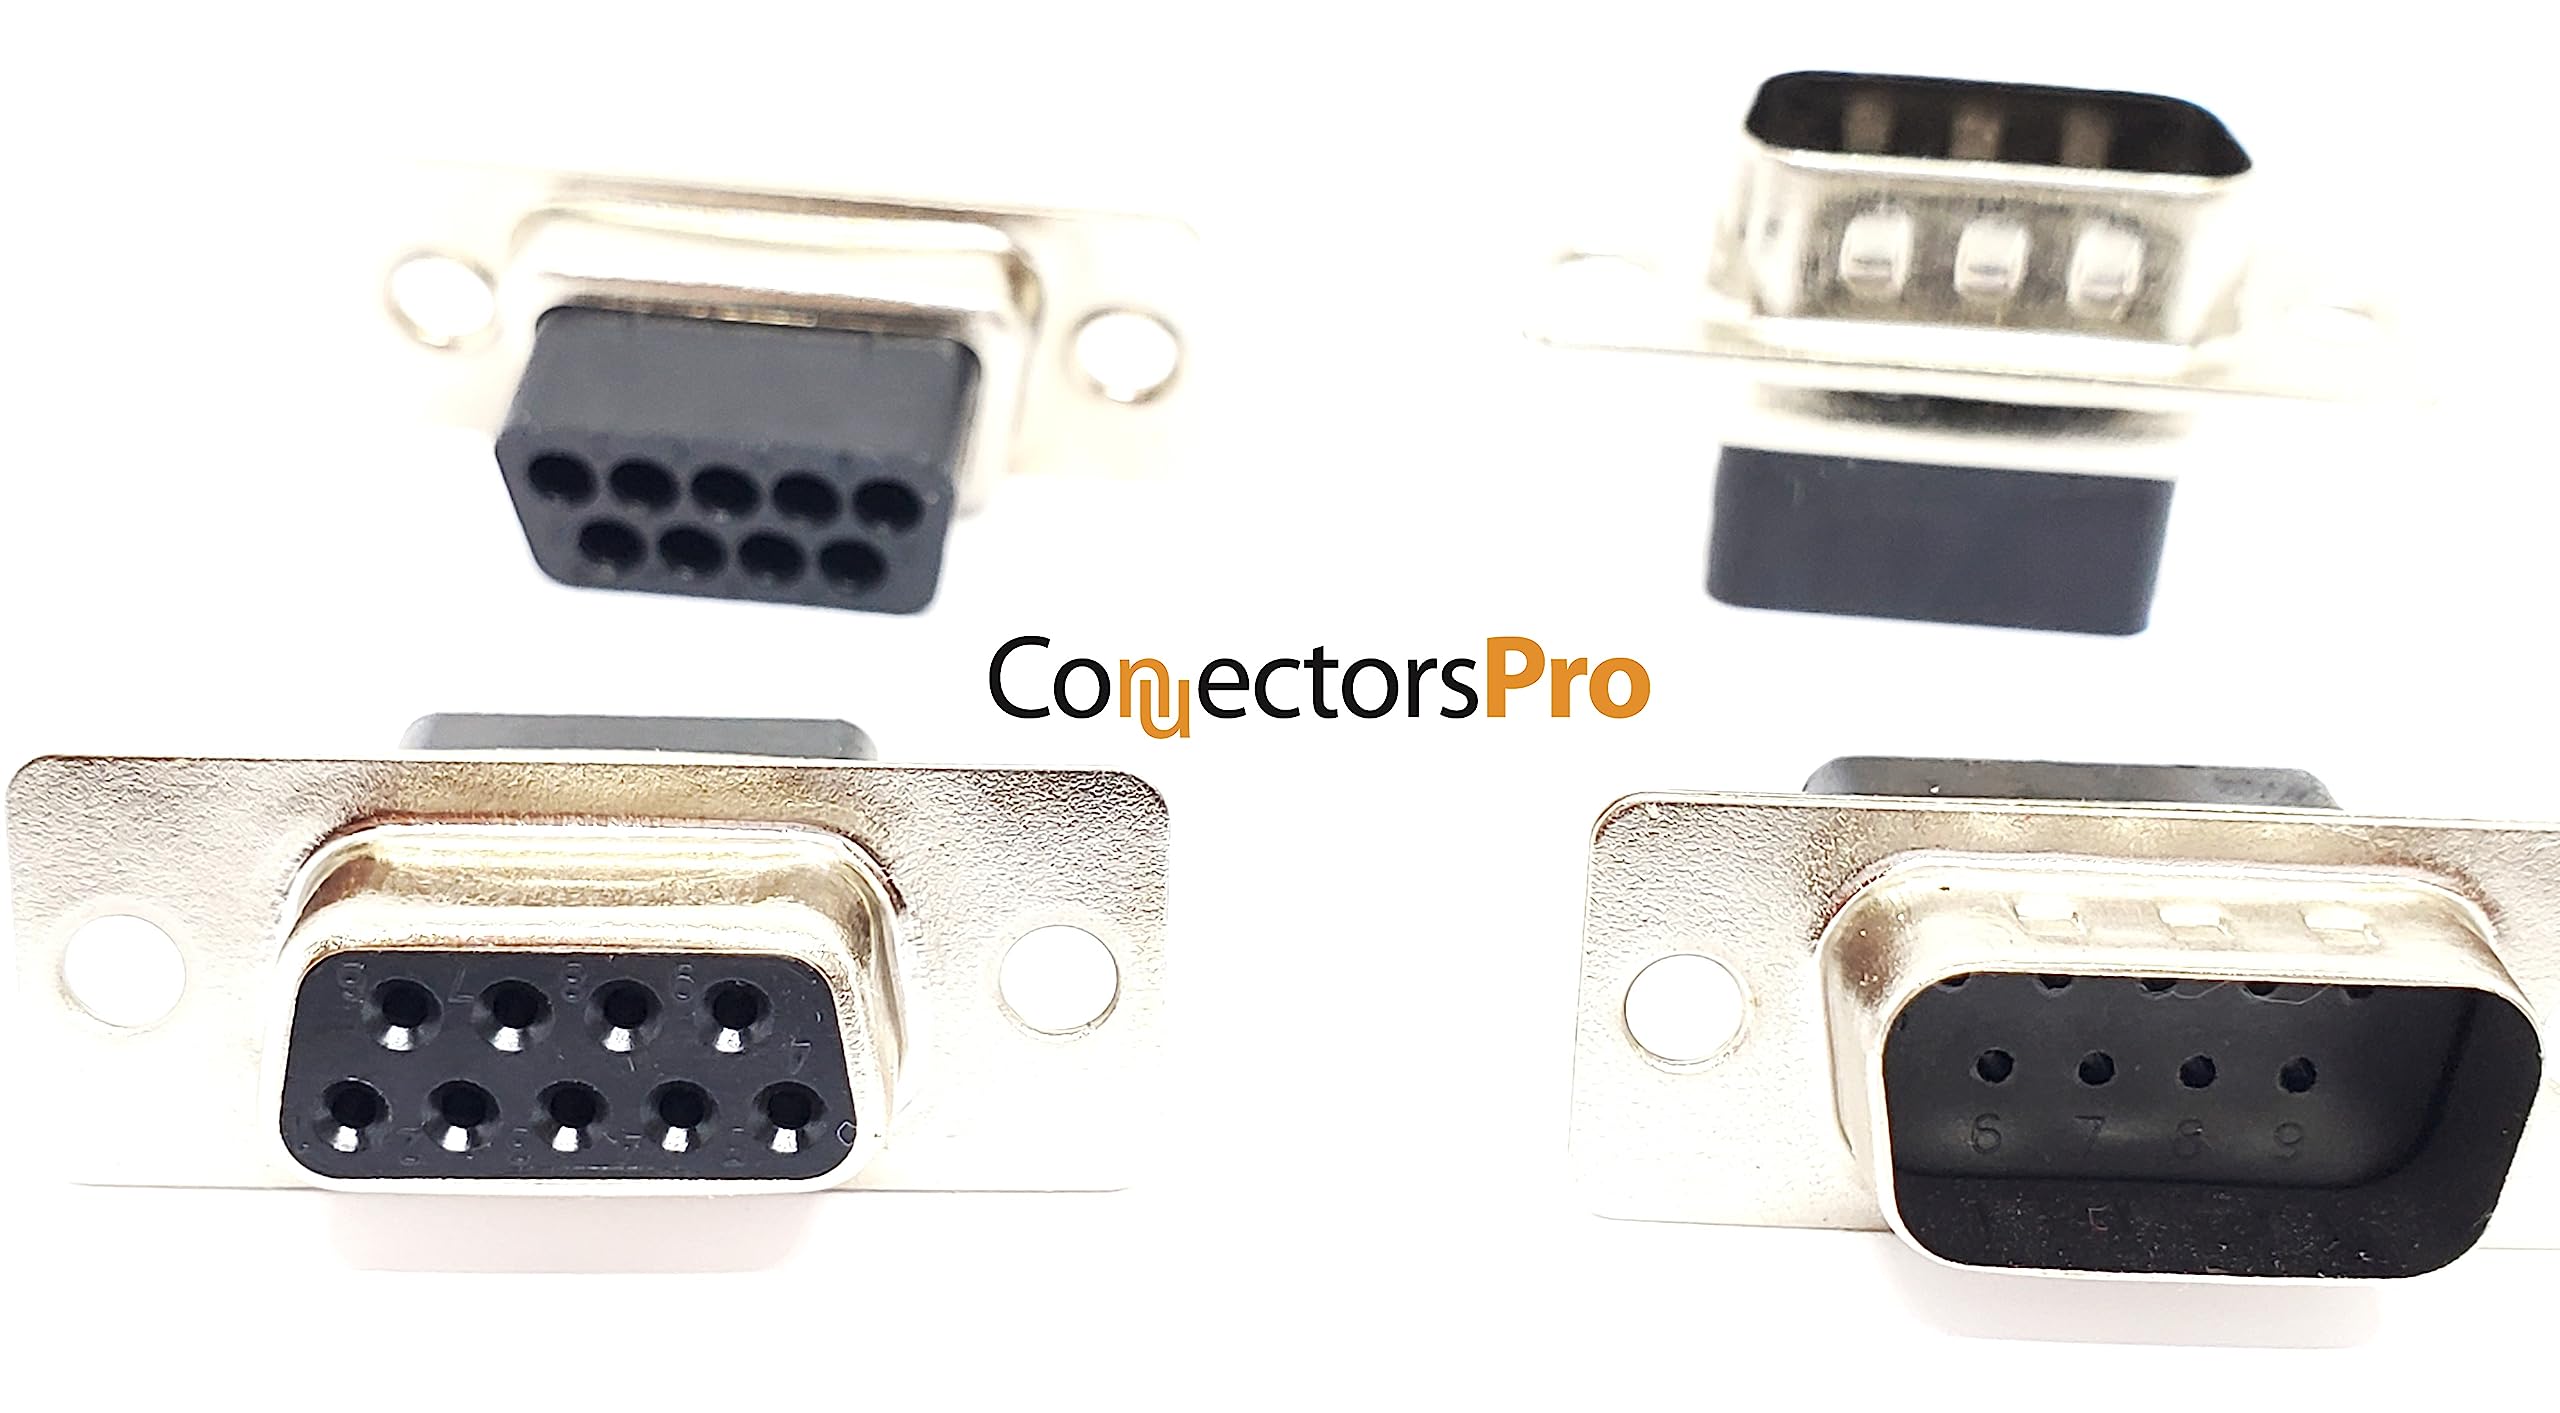 Connectors Pro 20 Pack of DB9 Male + Female D-Sub Crimp Type Connectors, 20 Pcs – 10 Pairs (10 Male + 10 Female) - No Pins